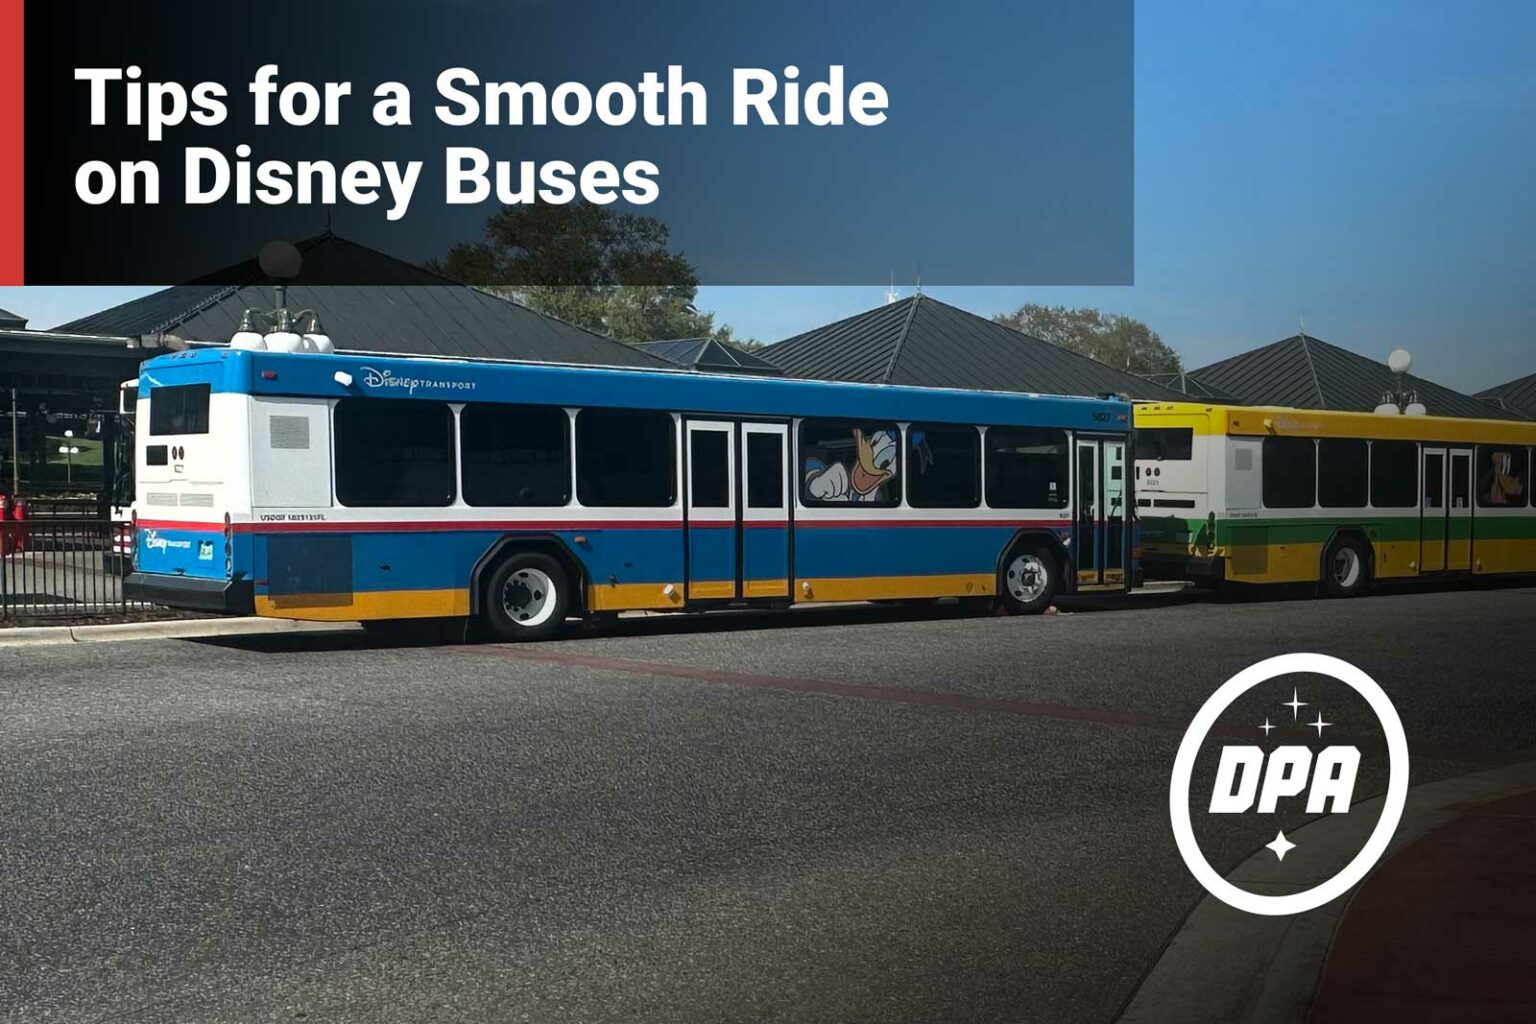 Tips for a Smooth Ride on Disney Buses